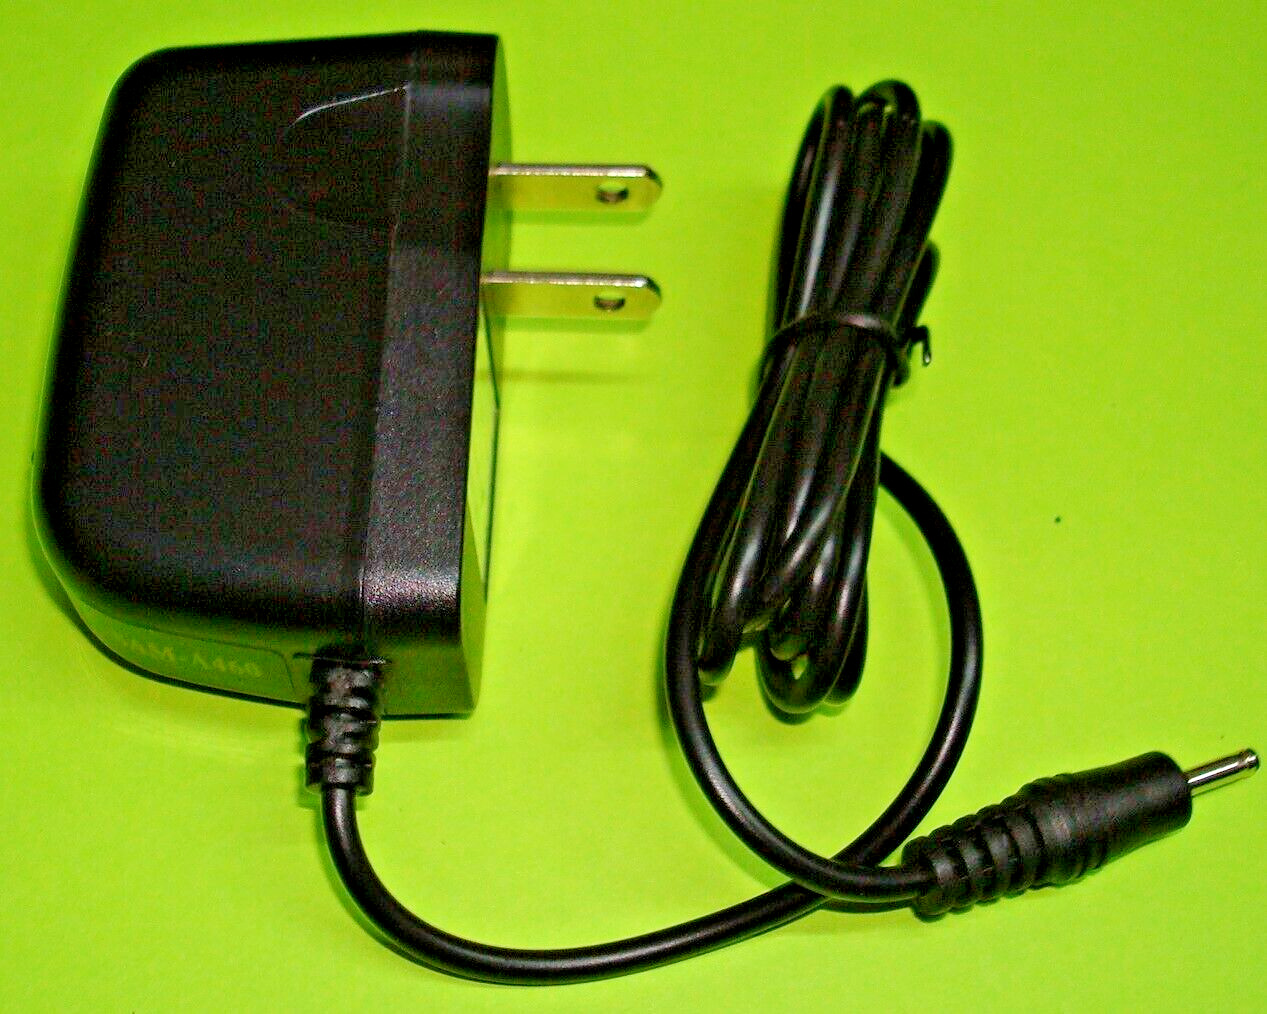 5V 2A 2.5mm AC Wall Charger for IRULU Walknbook W10 Tablet PC